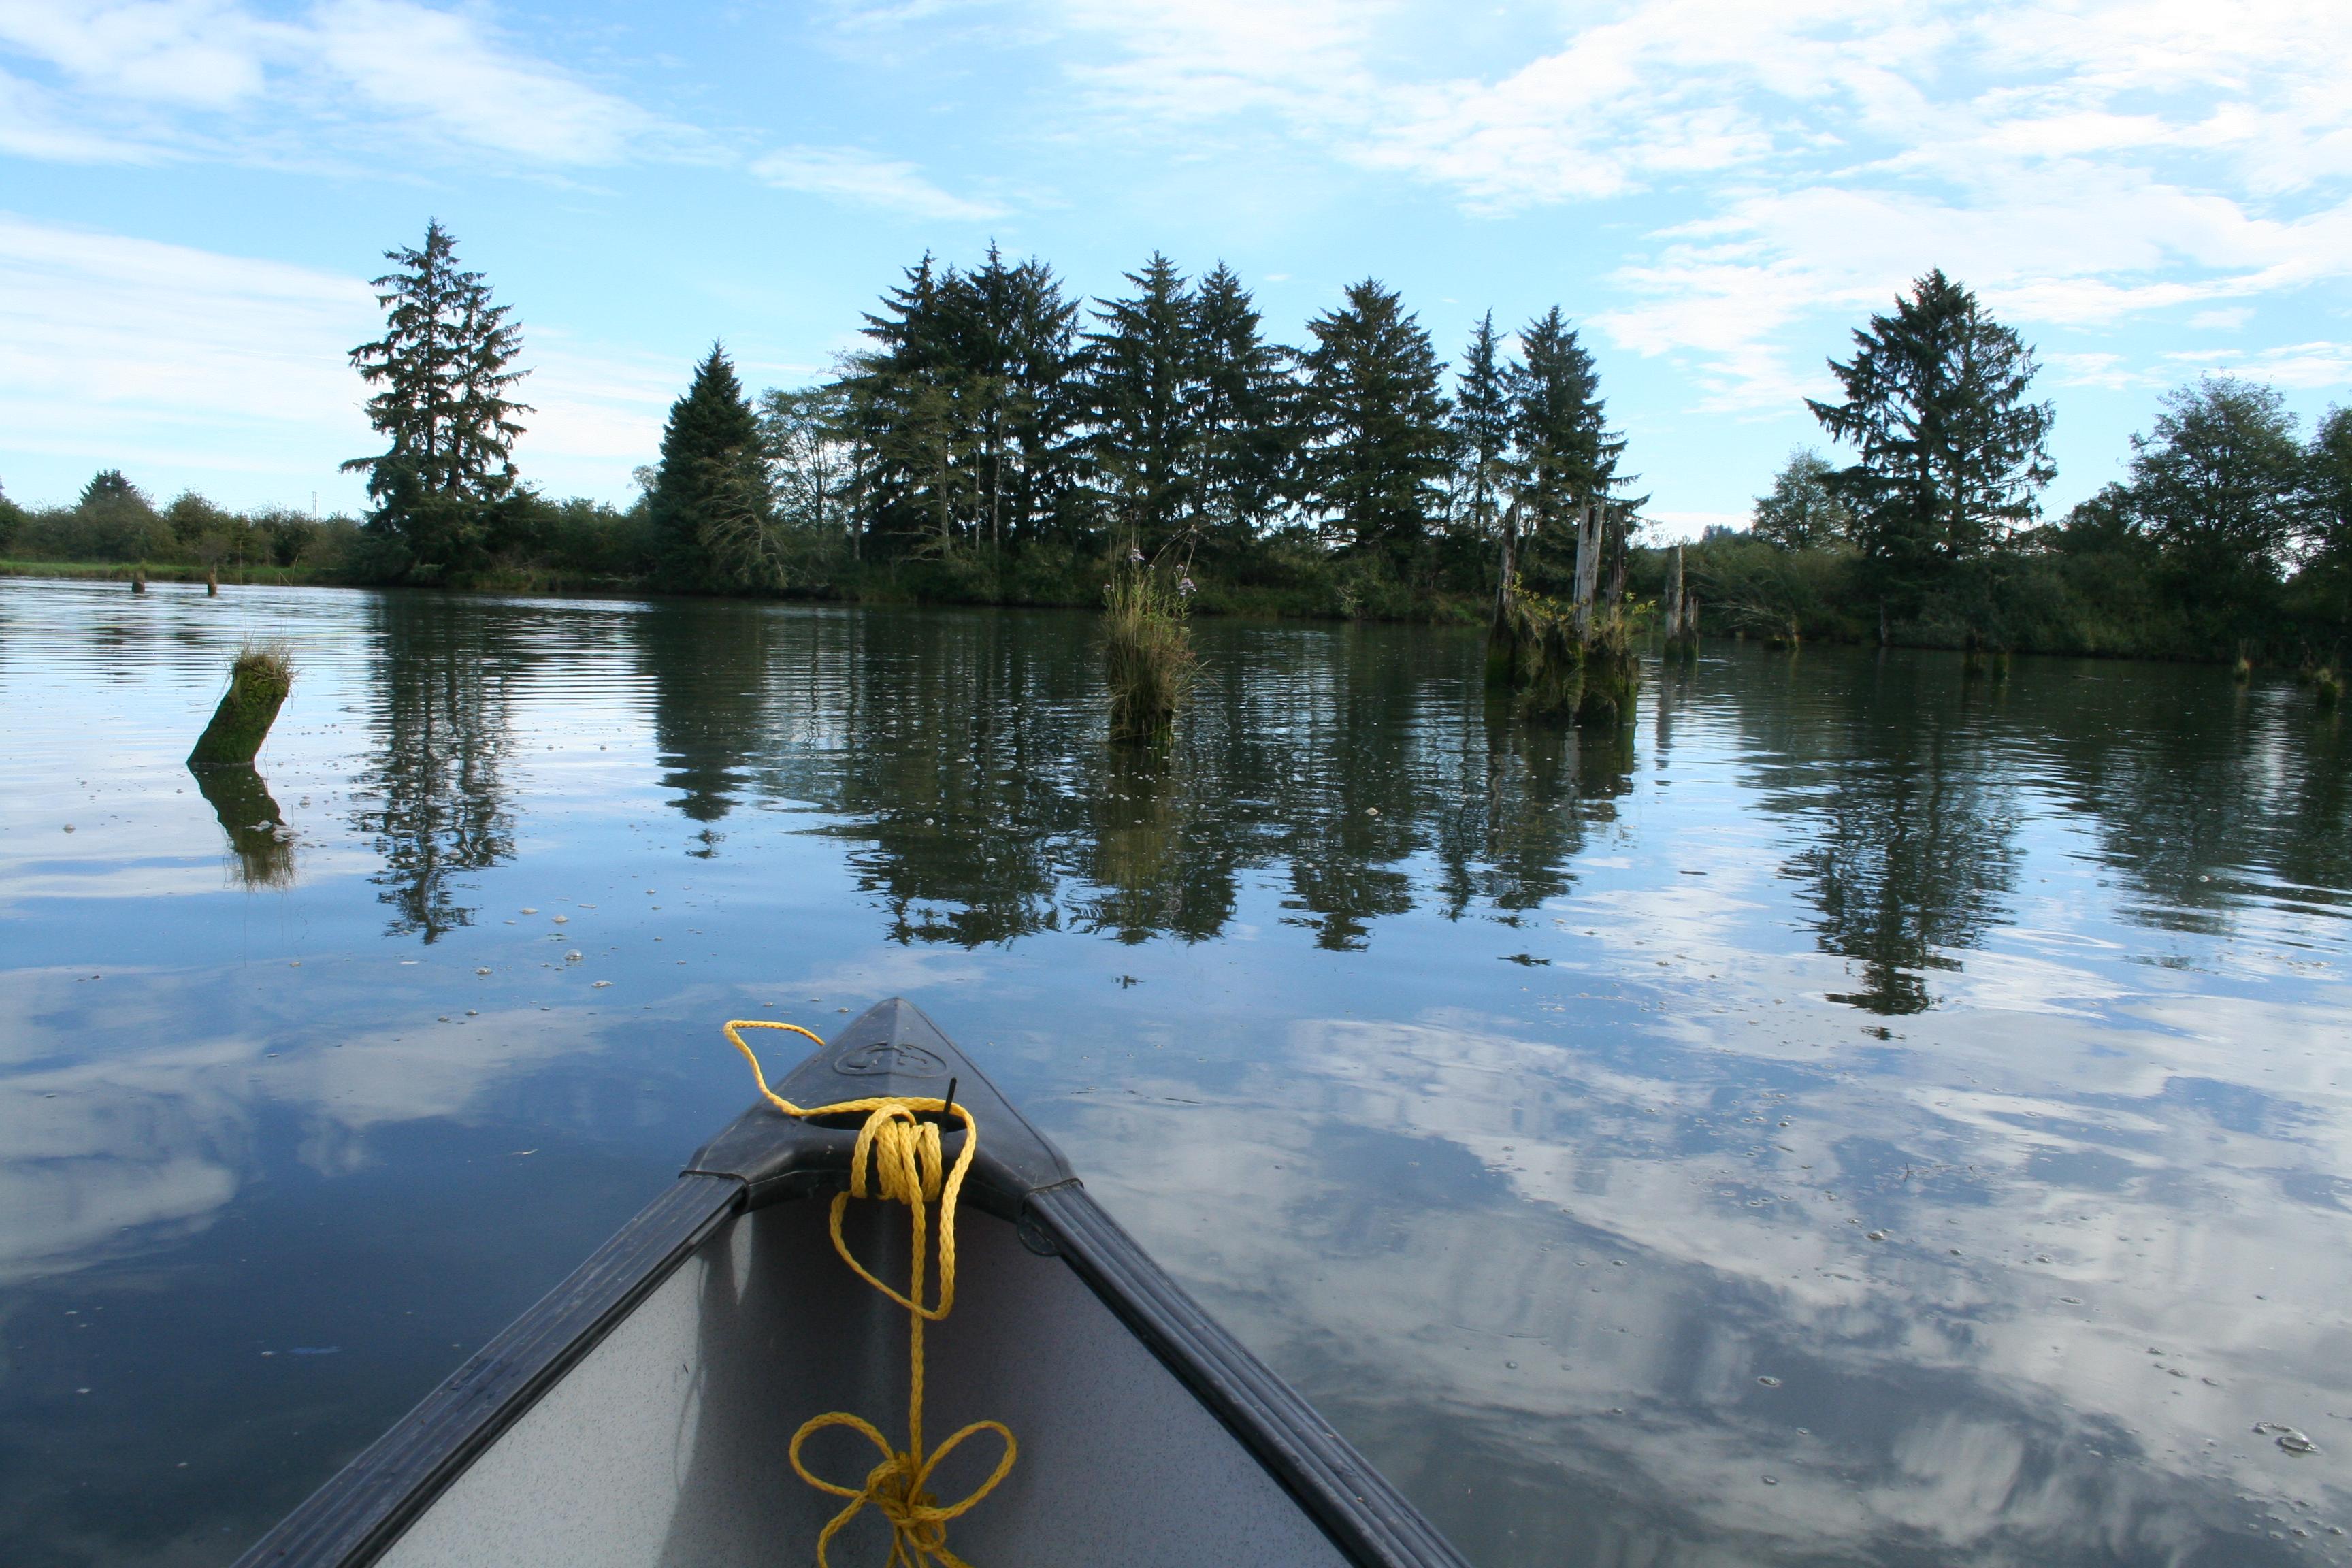 The front end of a canoe on a river, the water still and reflecting large trees and clouds.